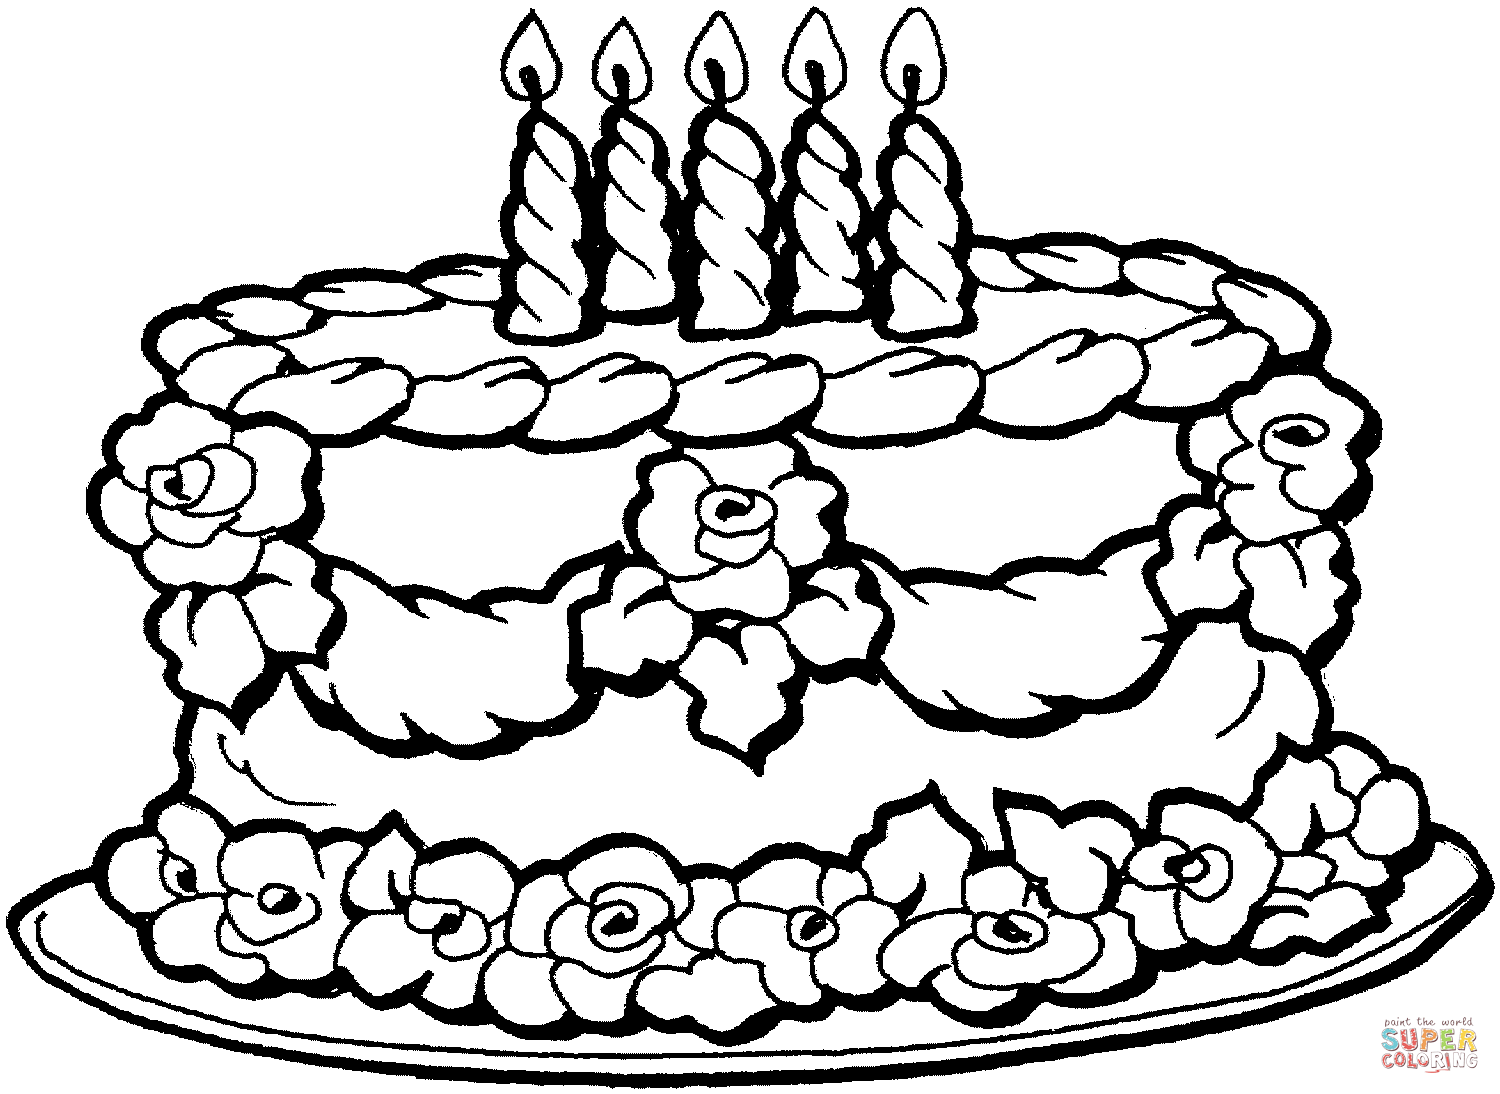 Big birthday cake coloring page | Free Printable Coloring Pages